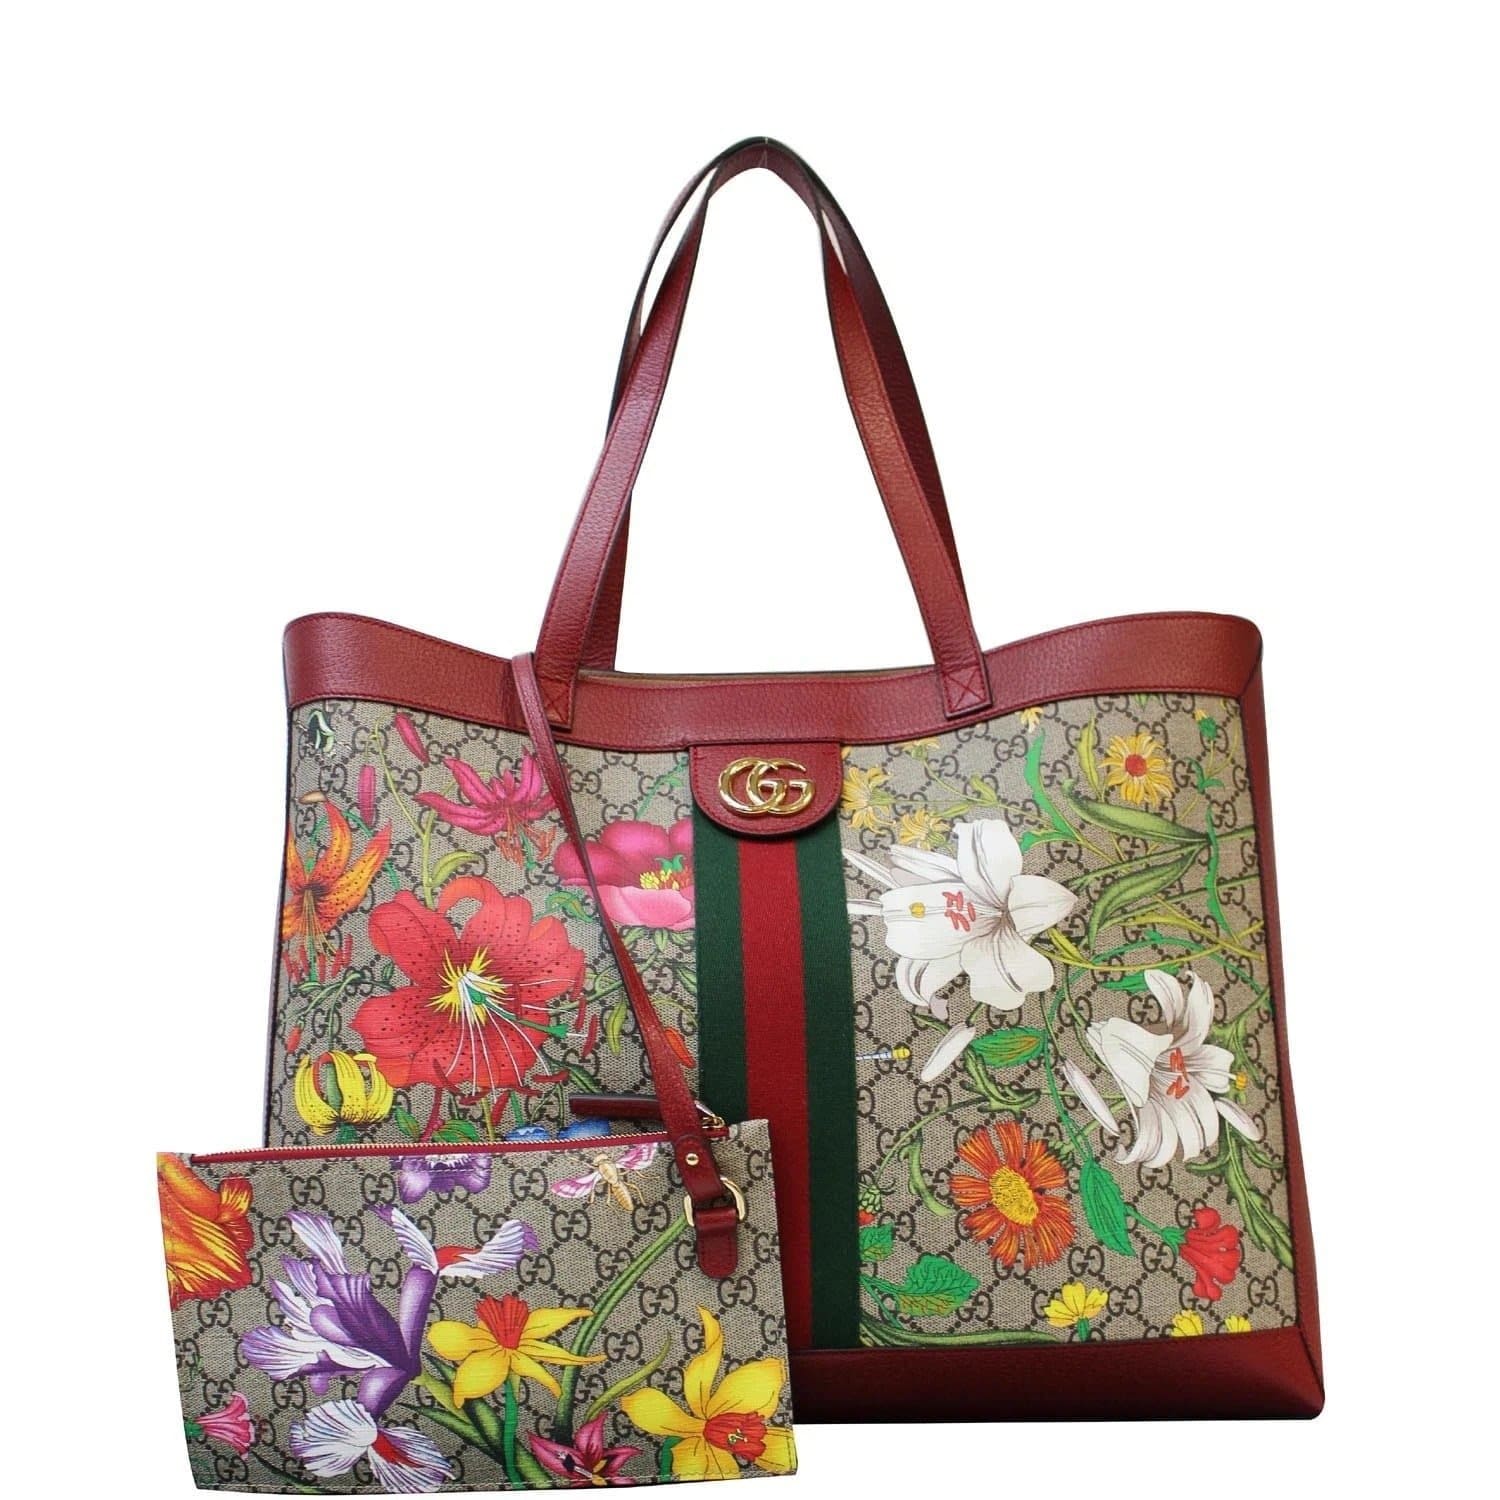 Gucci Ophidia Small GG Flora Tote Bag